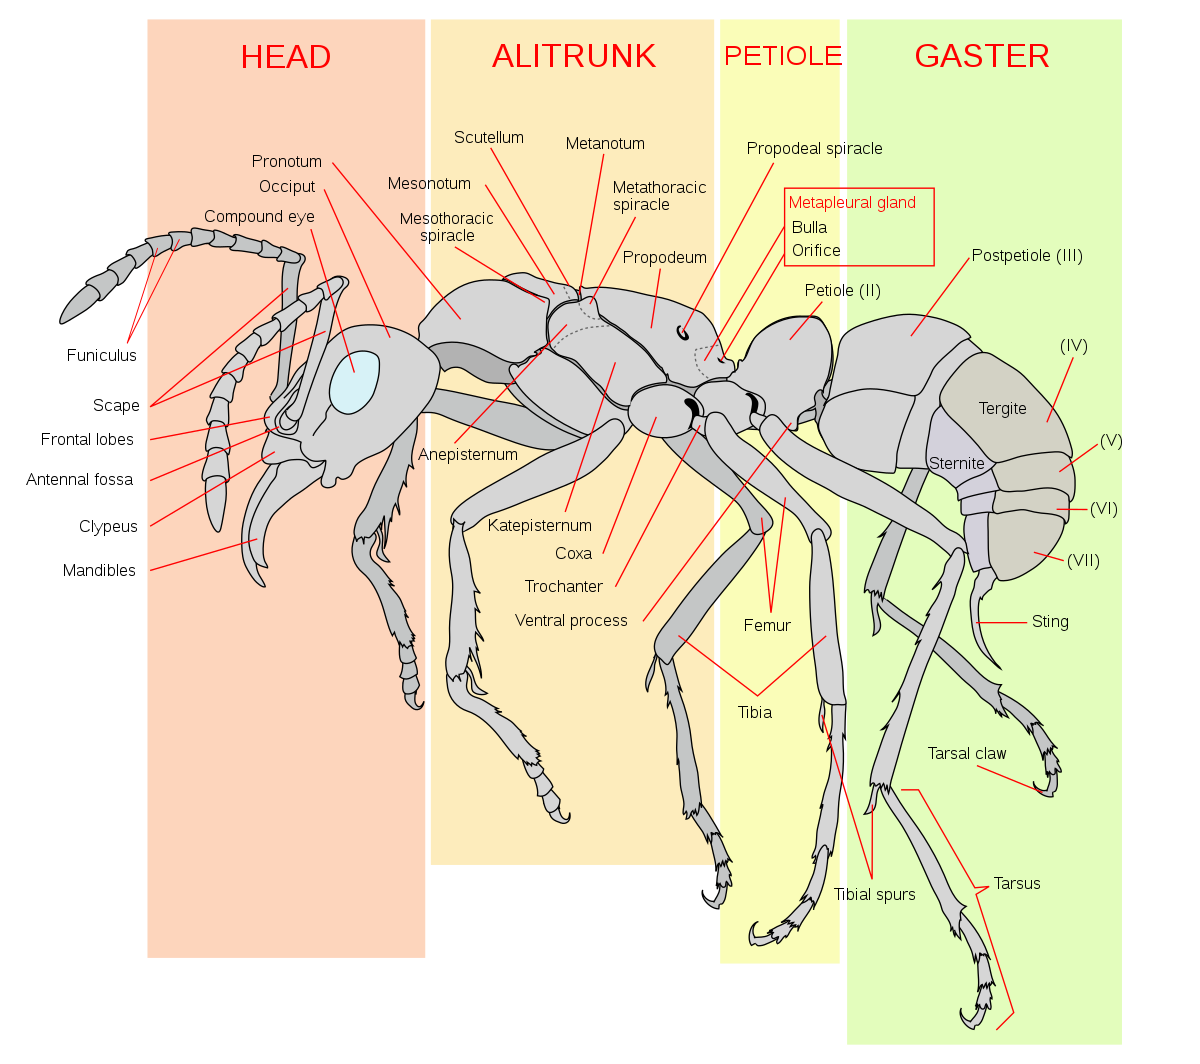 What is the anatomy of an ant?